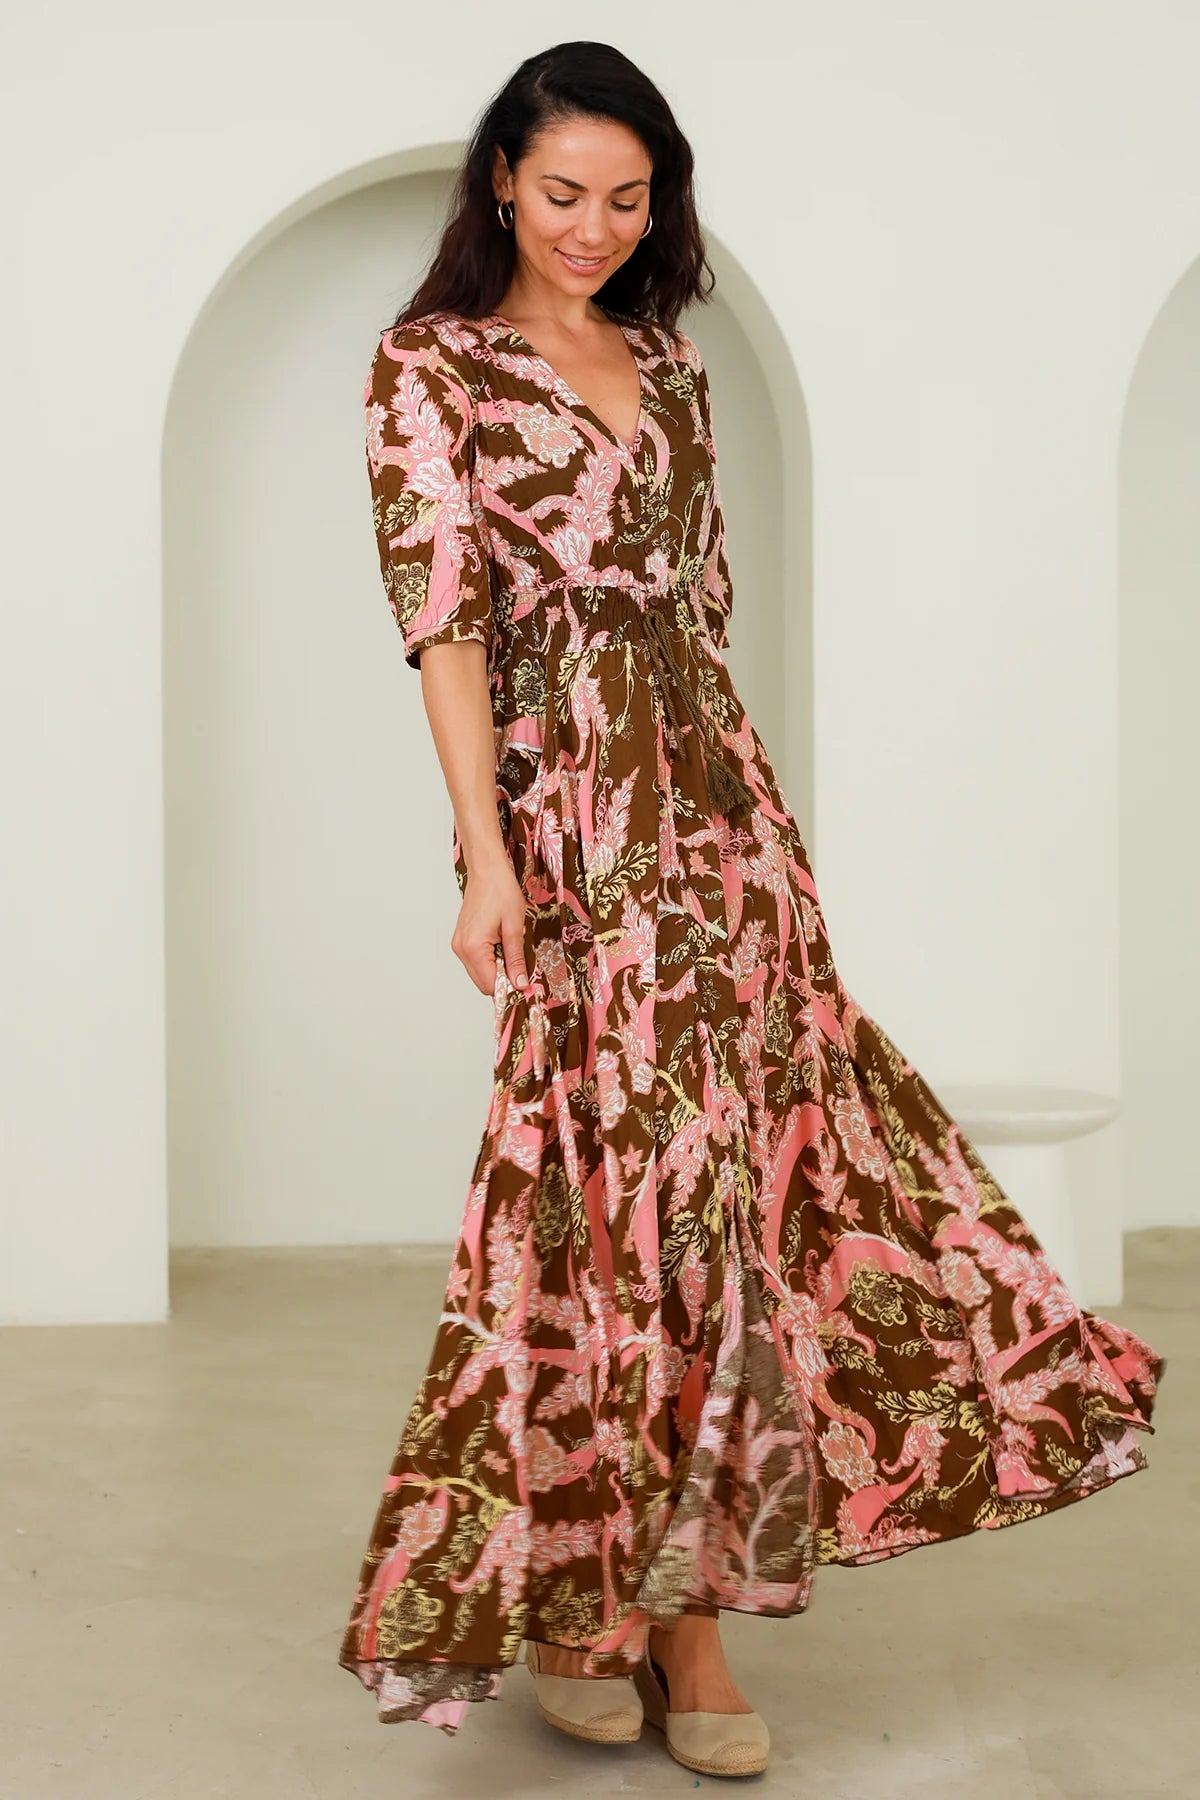 **PREORDER** Freyja Maxi Dress (Due early April): 
PREORDER: This item is a preorder item and on it’s way to us as we speak. Order now to secure your size and it will be sent out to you once it arrives at Ciao Bella - Ciao Bella Dresses - Dreamcatcher